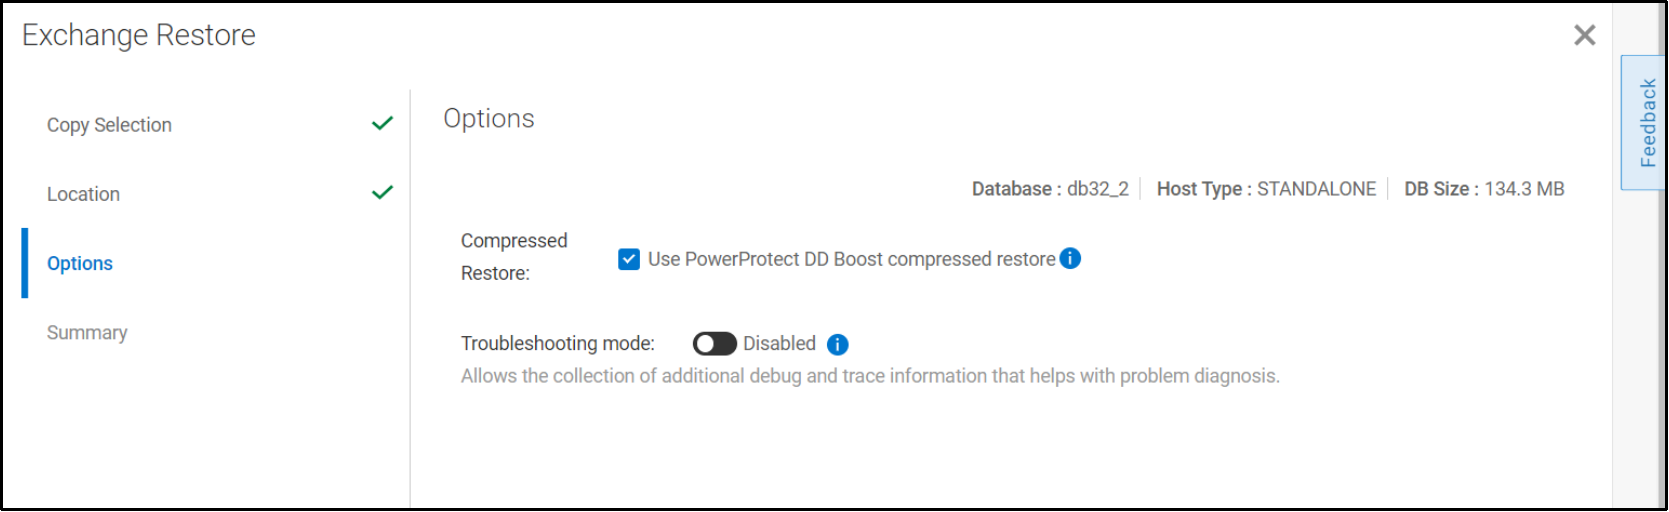 The image shows option to select PowerProtect DD compressed restore.